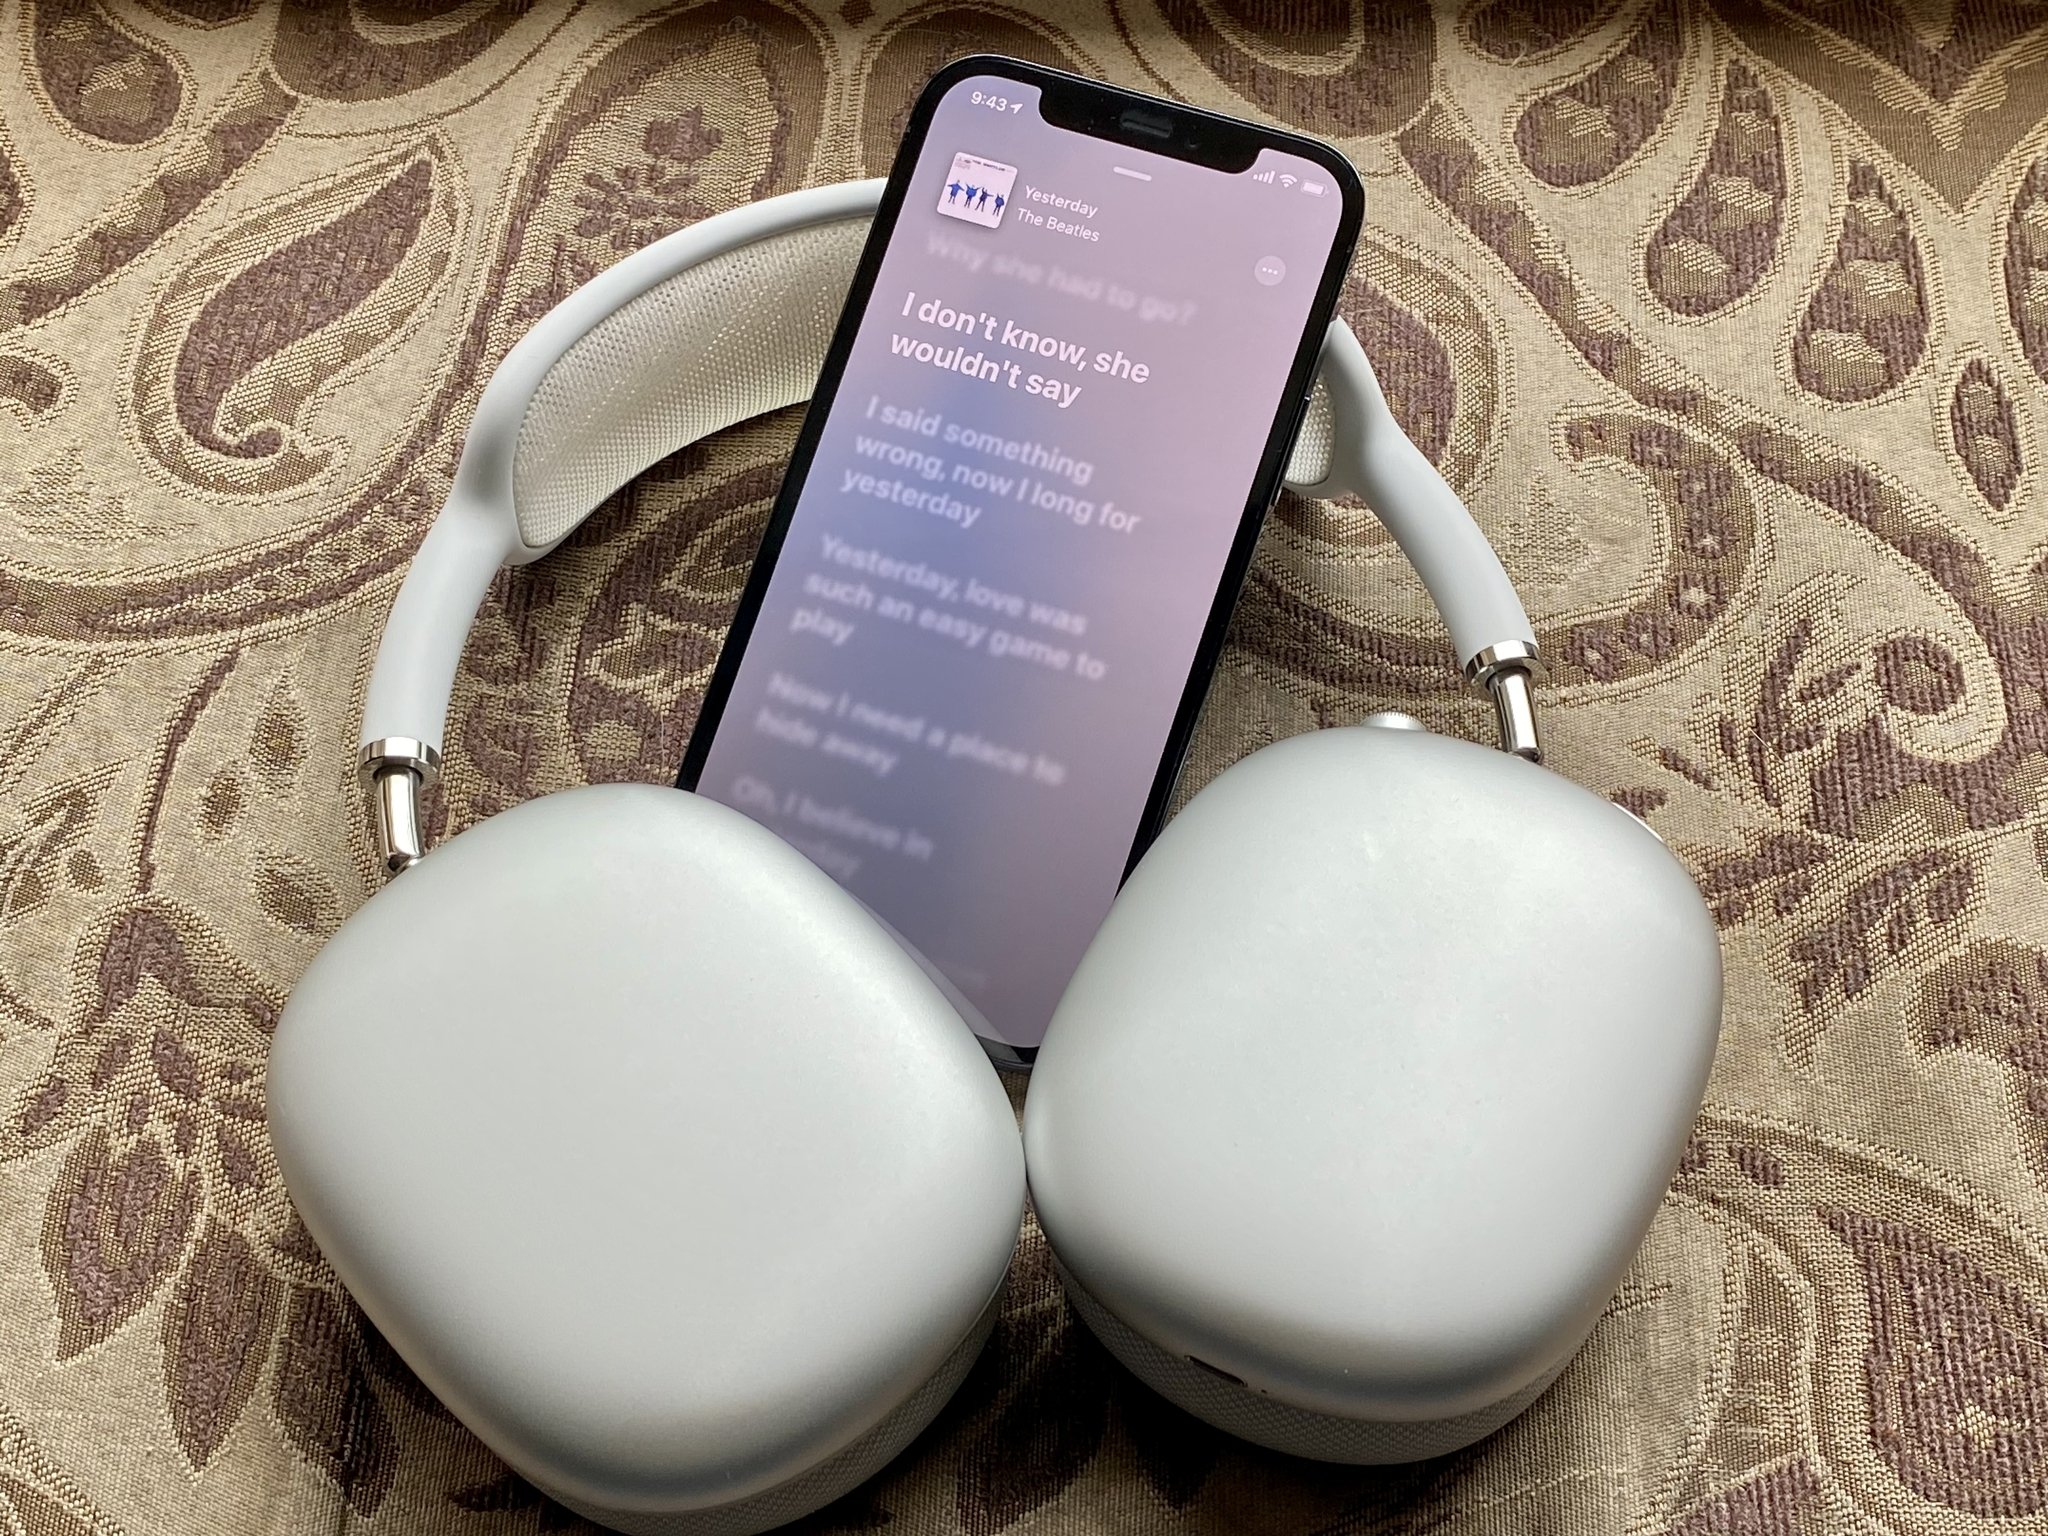 AirPods Max don't support Apple Music's lossless songs, Apple says